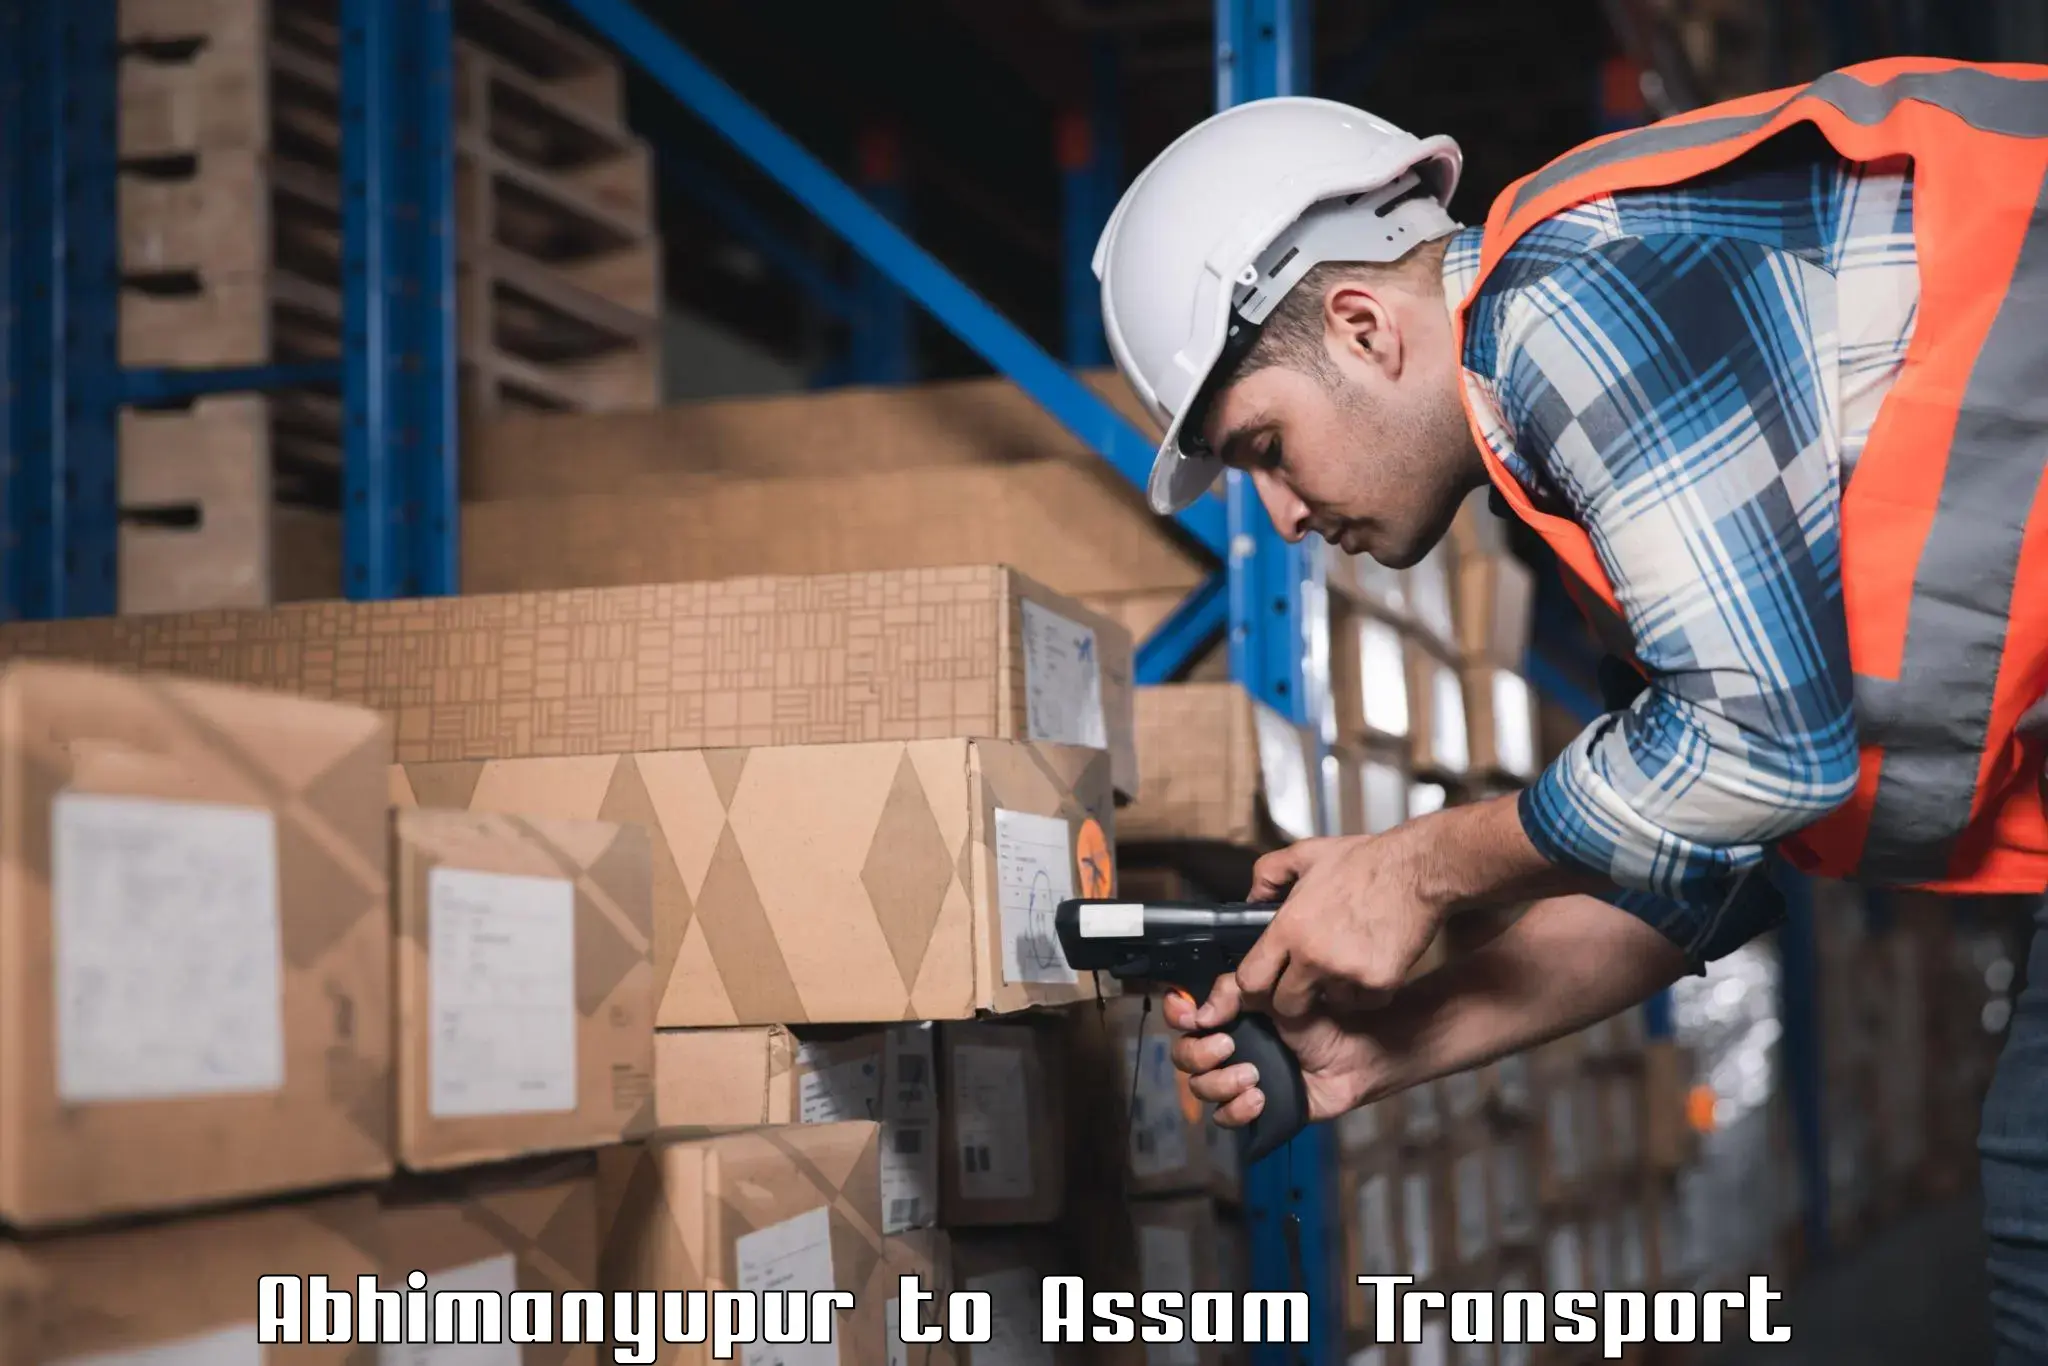 Shipping partner Abhimanyupur to Titabor